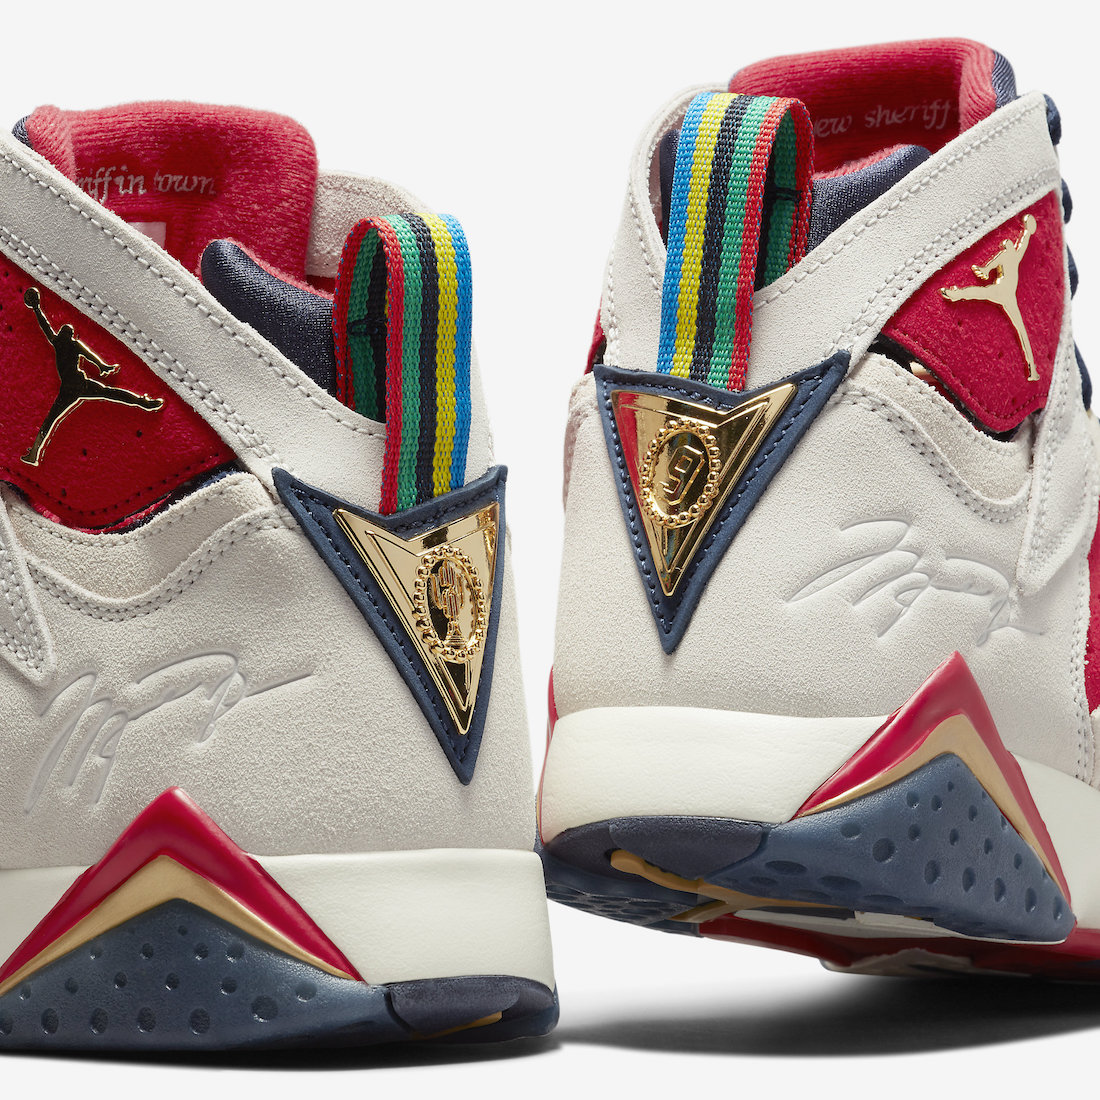 Trophy Room x Air Jordan 7 DM1195  IetpShops - Craft collection will  expand beyond the Air Jordan 2 and Air Jordan 4 in 2023 - 474 Release Date  + Where to Buy